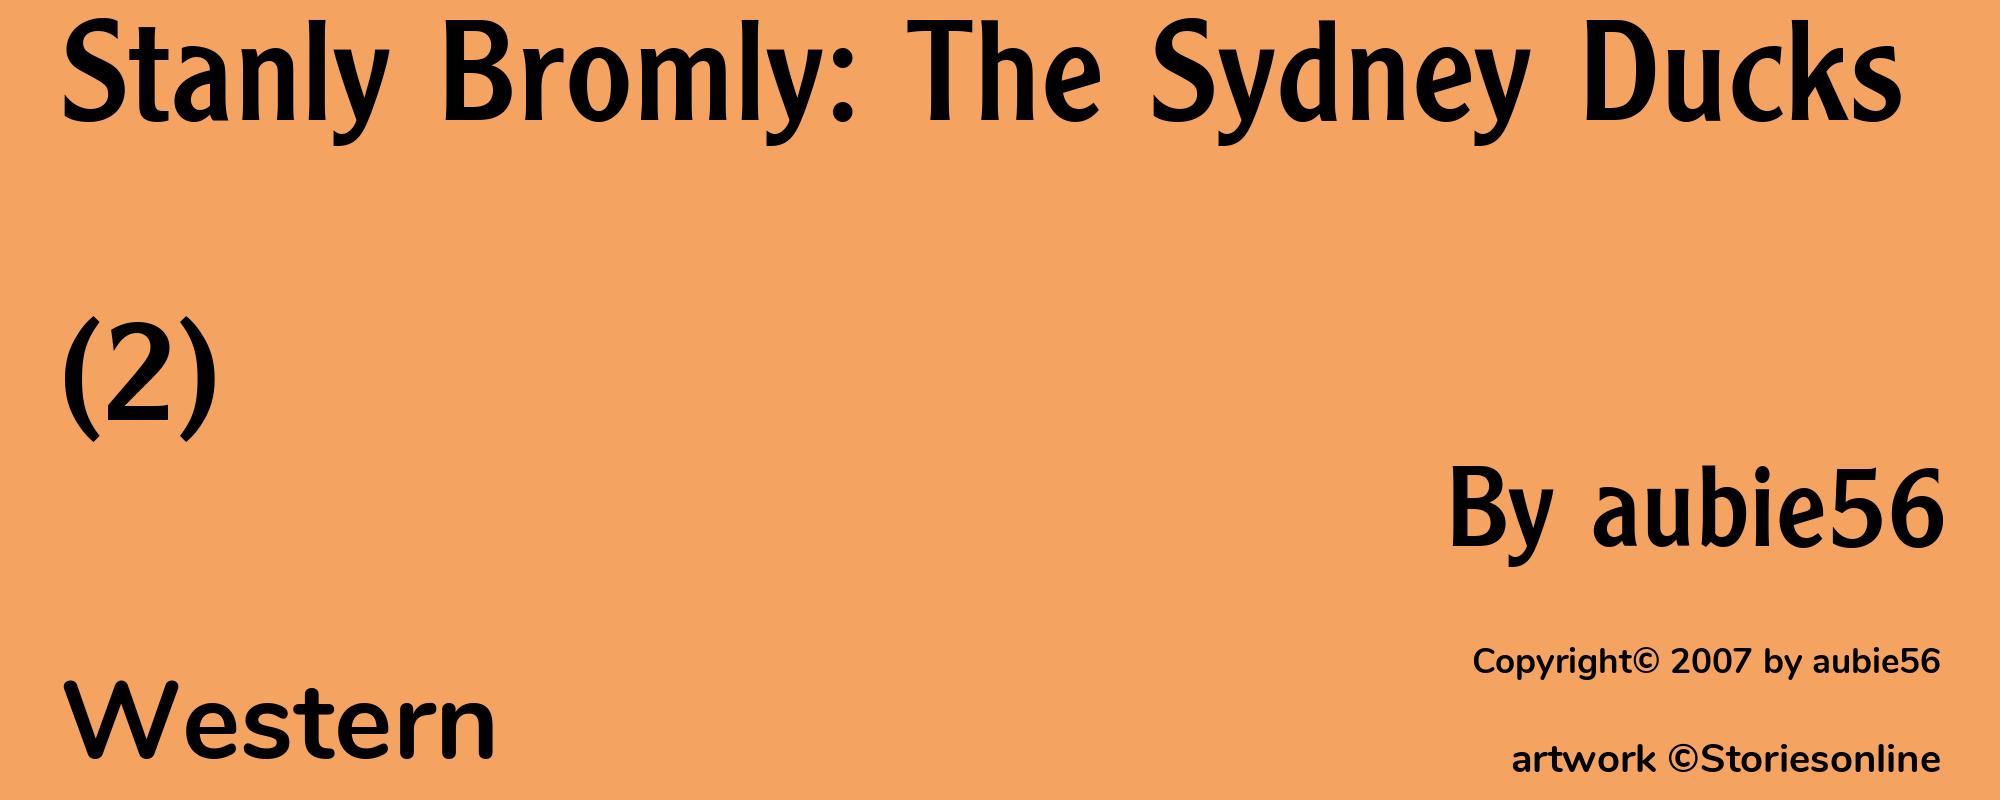 Stanly Bromly: The Sydney Ducks (2) - Cover